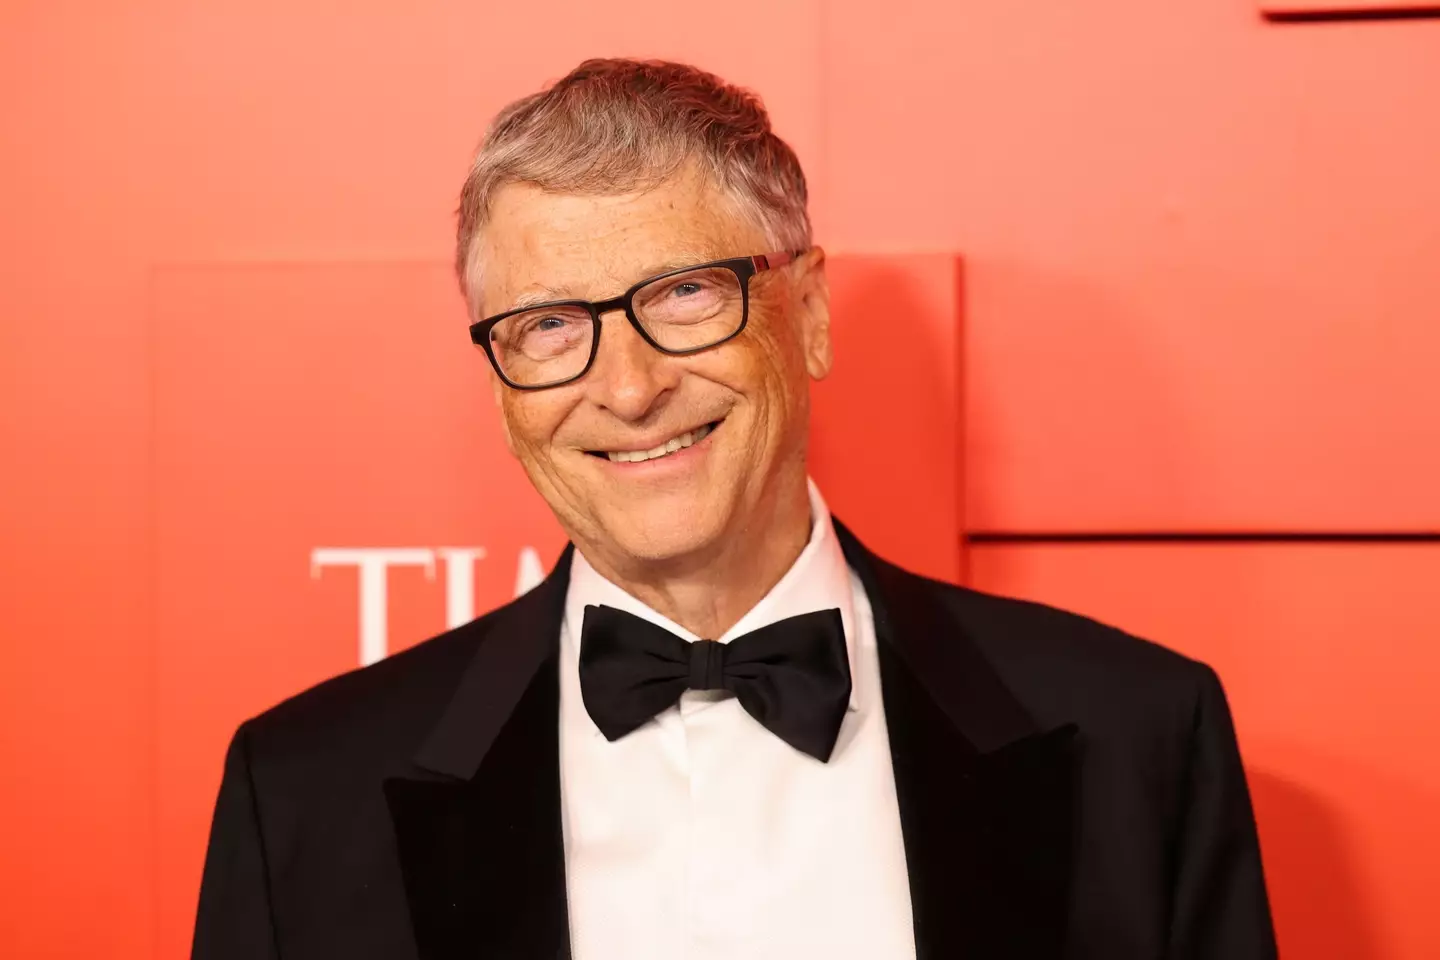 Bill Gates has answered the age-old question about whether he would pick up a $100 off the ground.